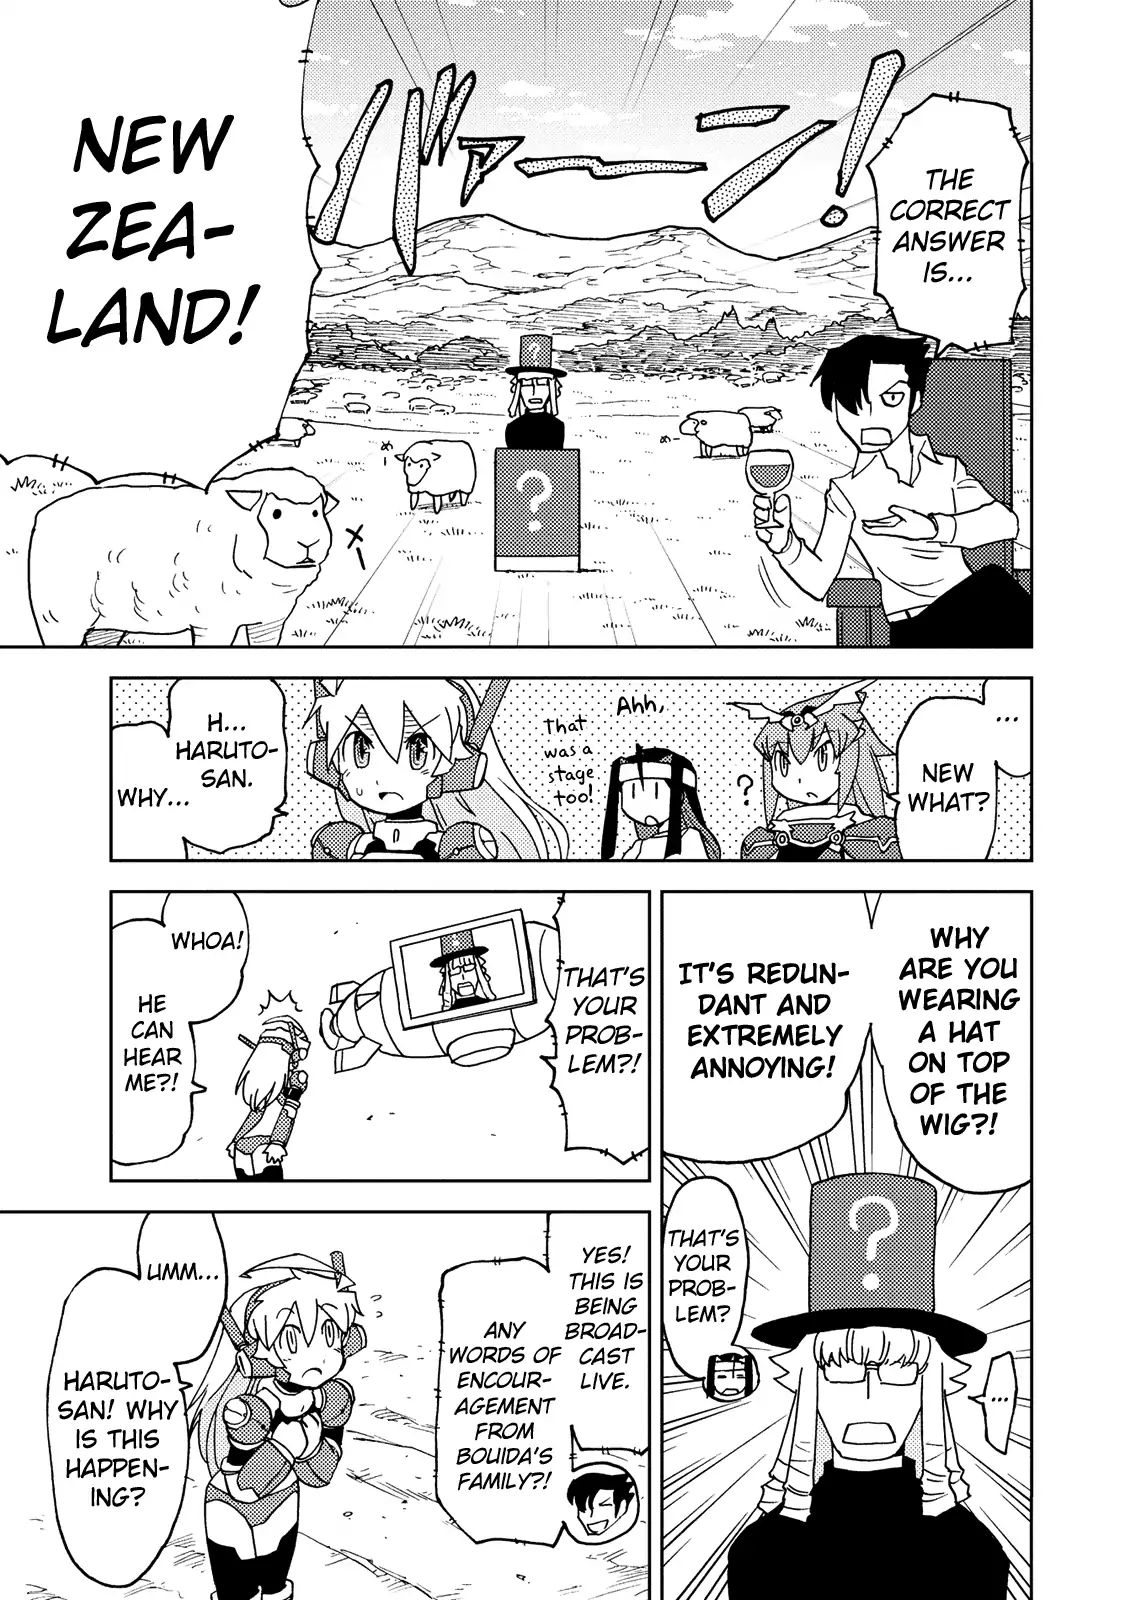 Choukadou Girl 1/6 Vol.3 Chapter 30: The Greatest Ever!! Do You Wanna Go To New Zealand?!